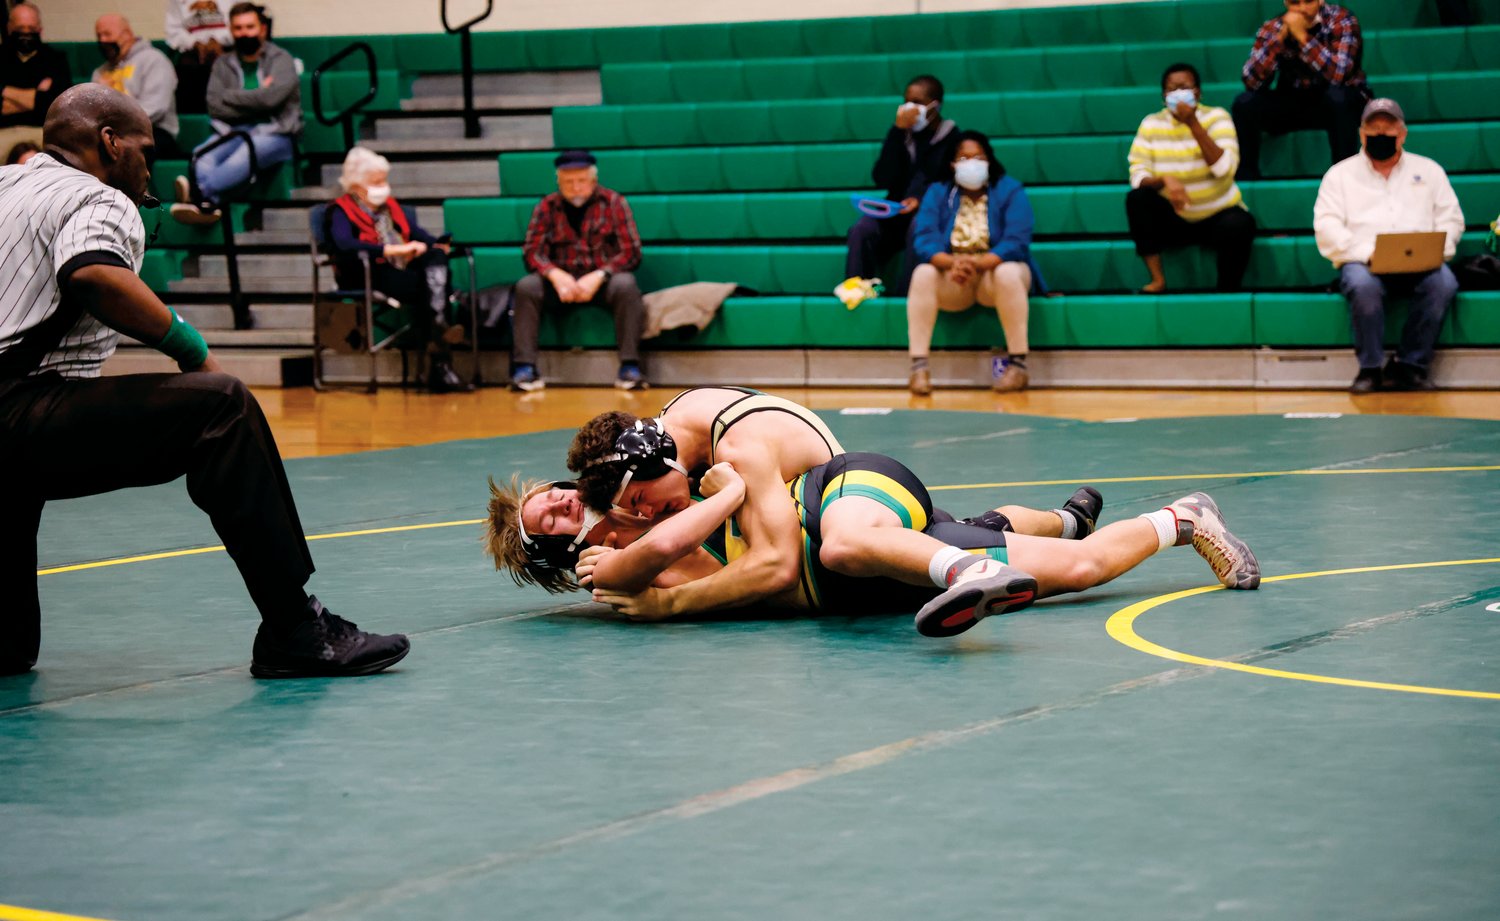 Northwood's Ryan Brinker puts the squeeze on Eastern Alamance's Jackson Fulcher, crunching him with a bear hug to record a fall in just 40 seconds of their 182-pound match during the Chargers' 42-36 win over the Eagles last Thursday.